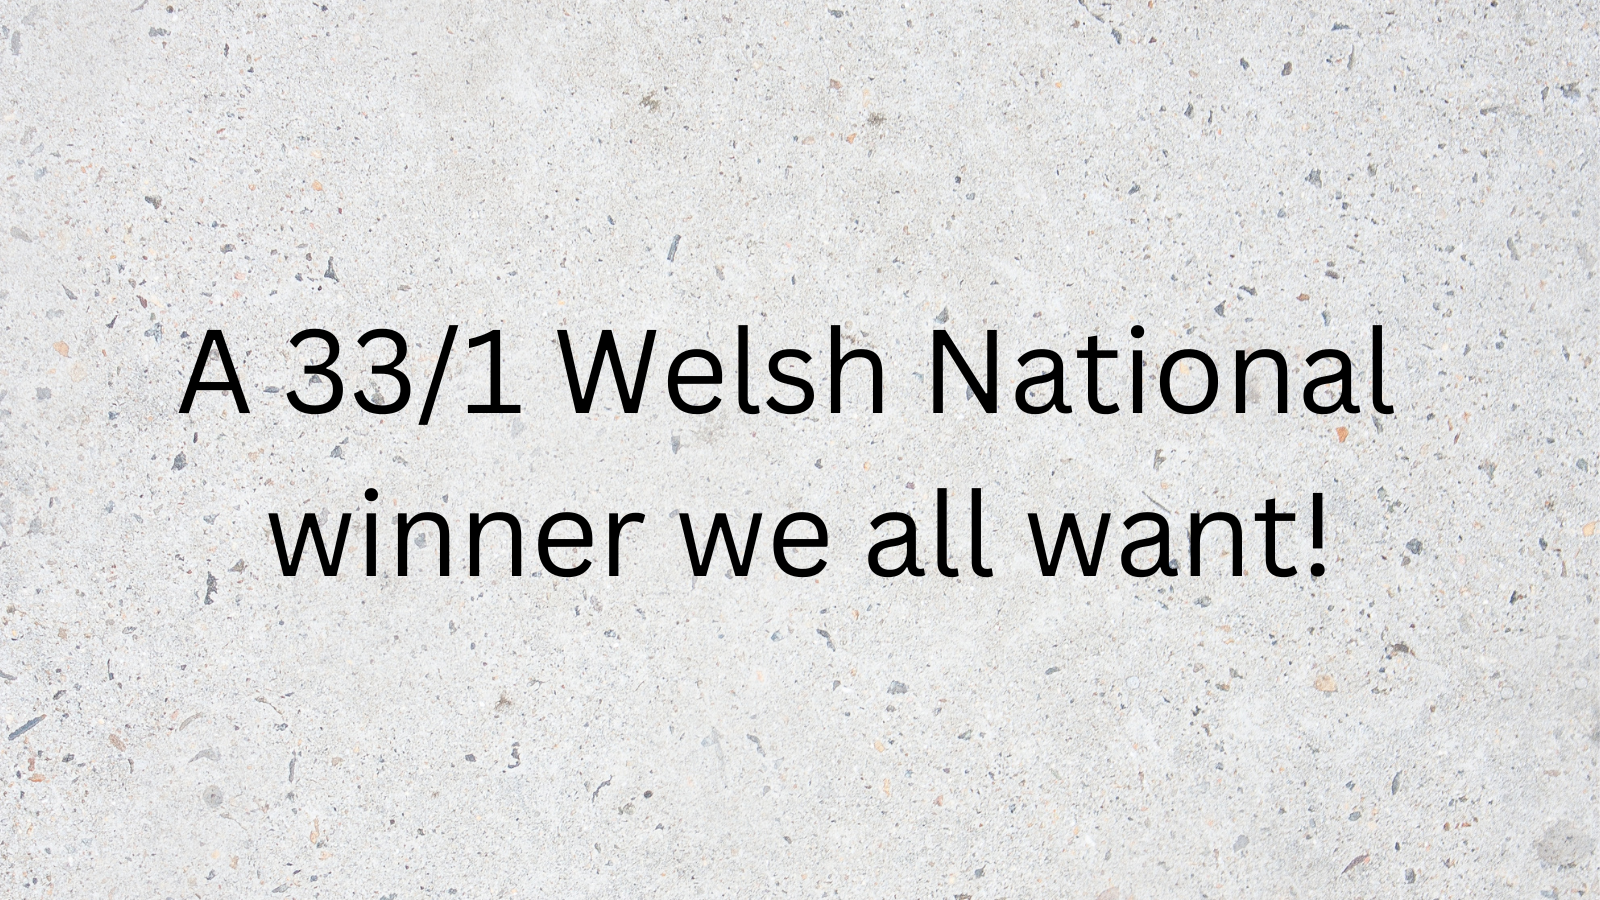 A 33/1 Welsh National winner we all want!